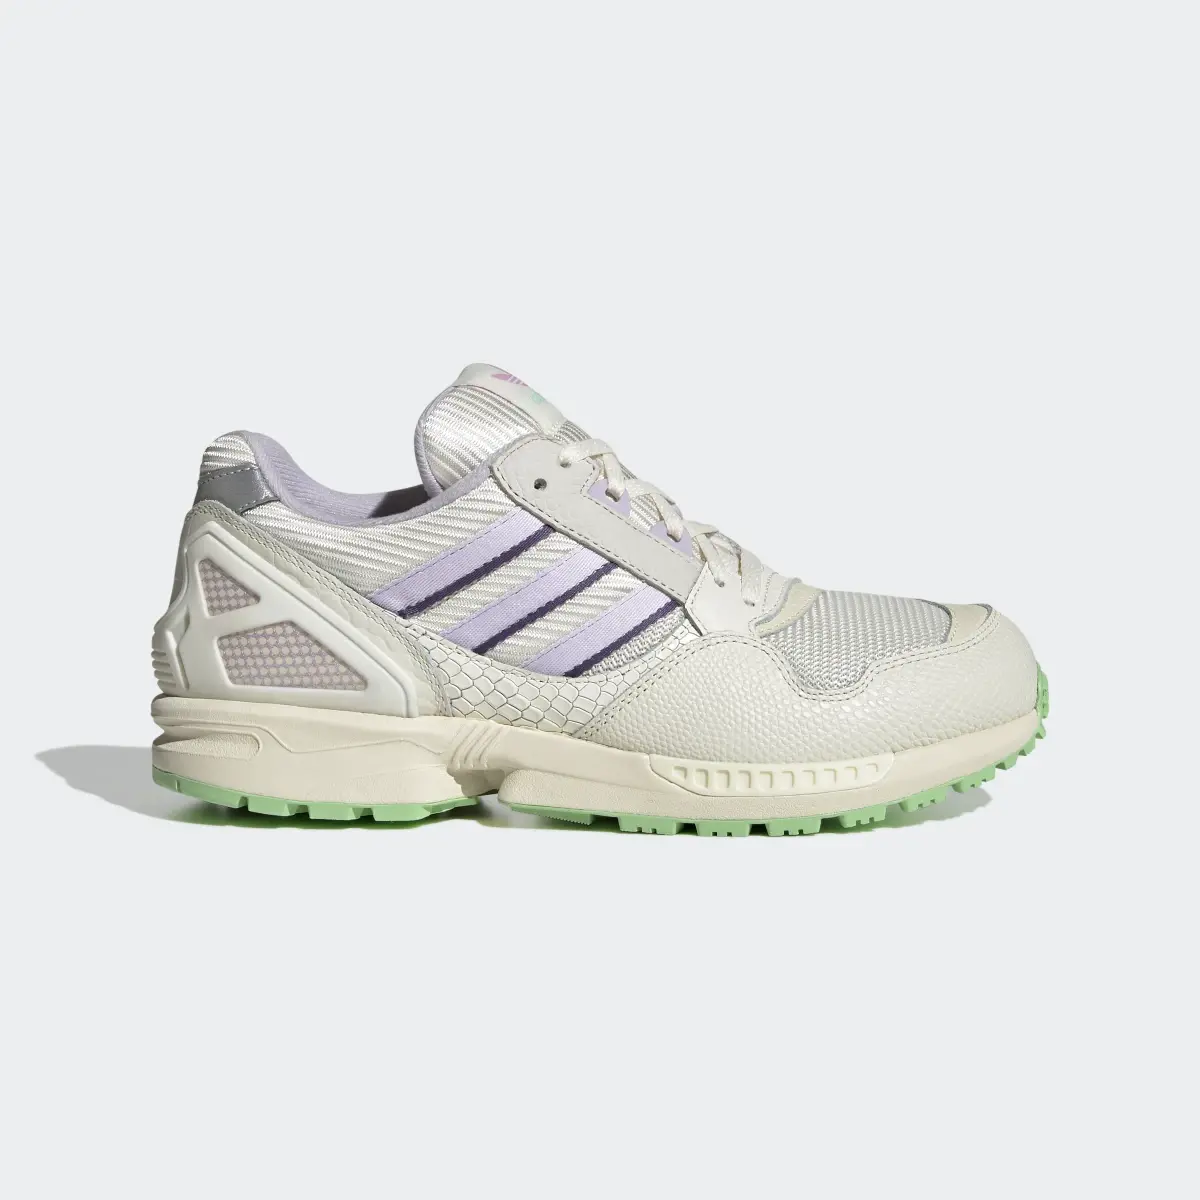 Adidas ZX 9020 Shoes. 2